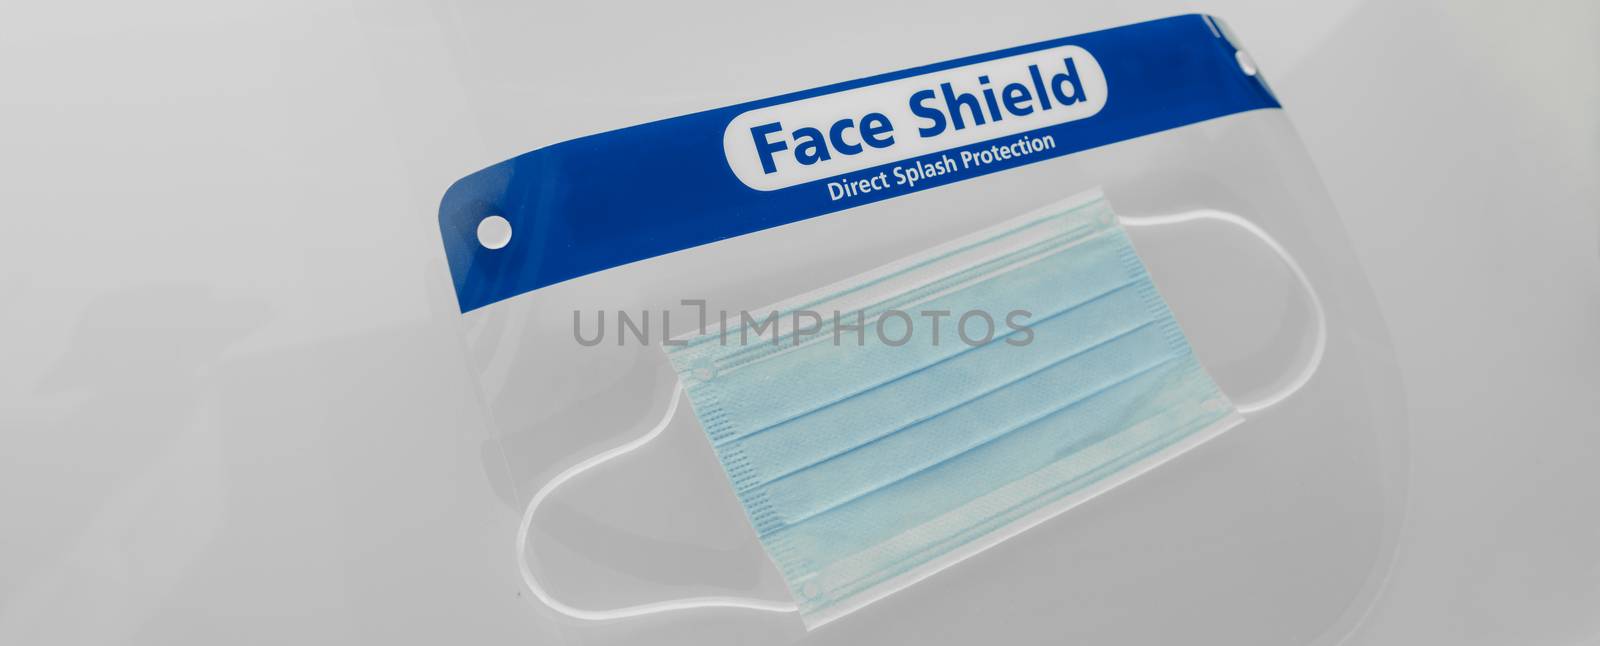 PPE for covid and corona virus. Medical mask and face shield protective equipment for healthcare workers and business. Panoramic banner crop of face covering protection.